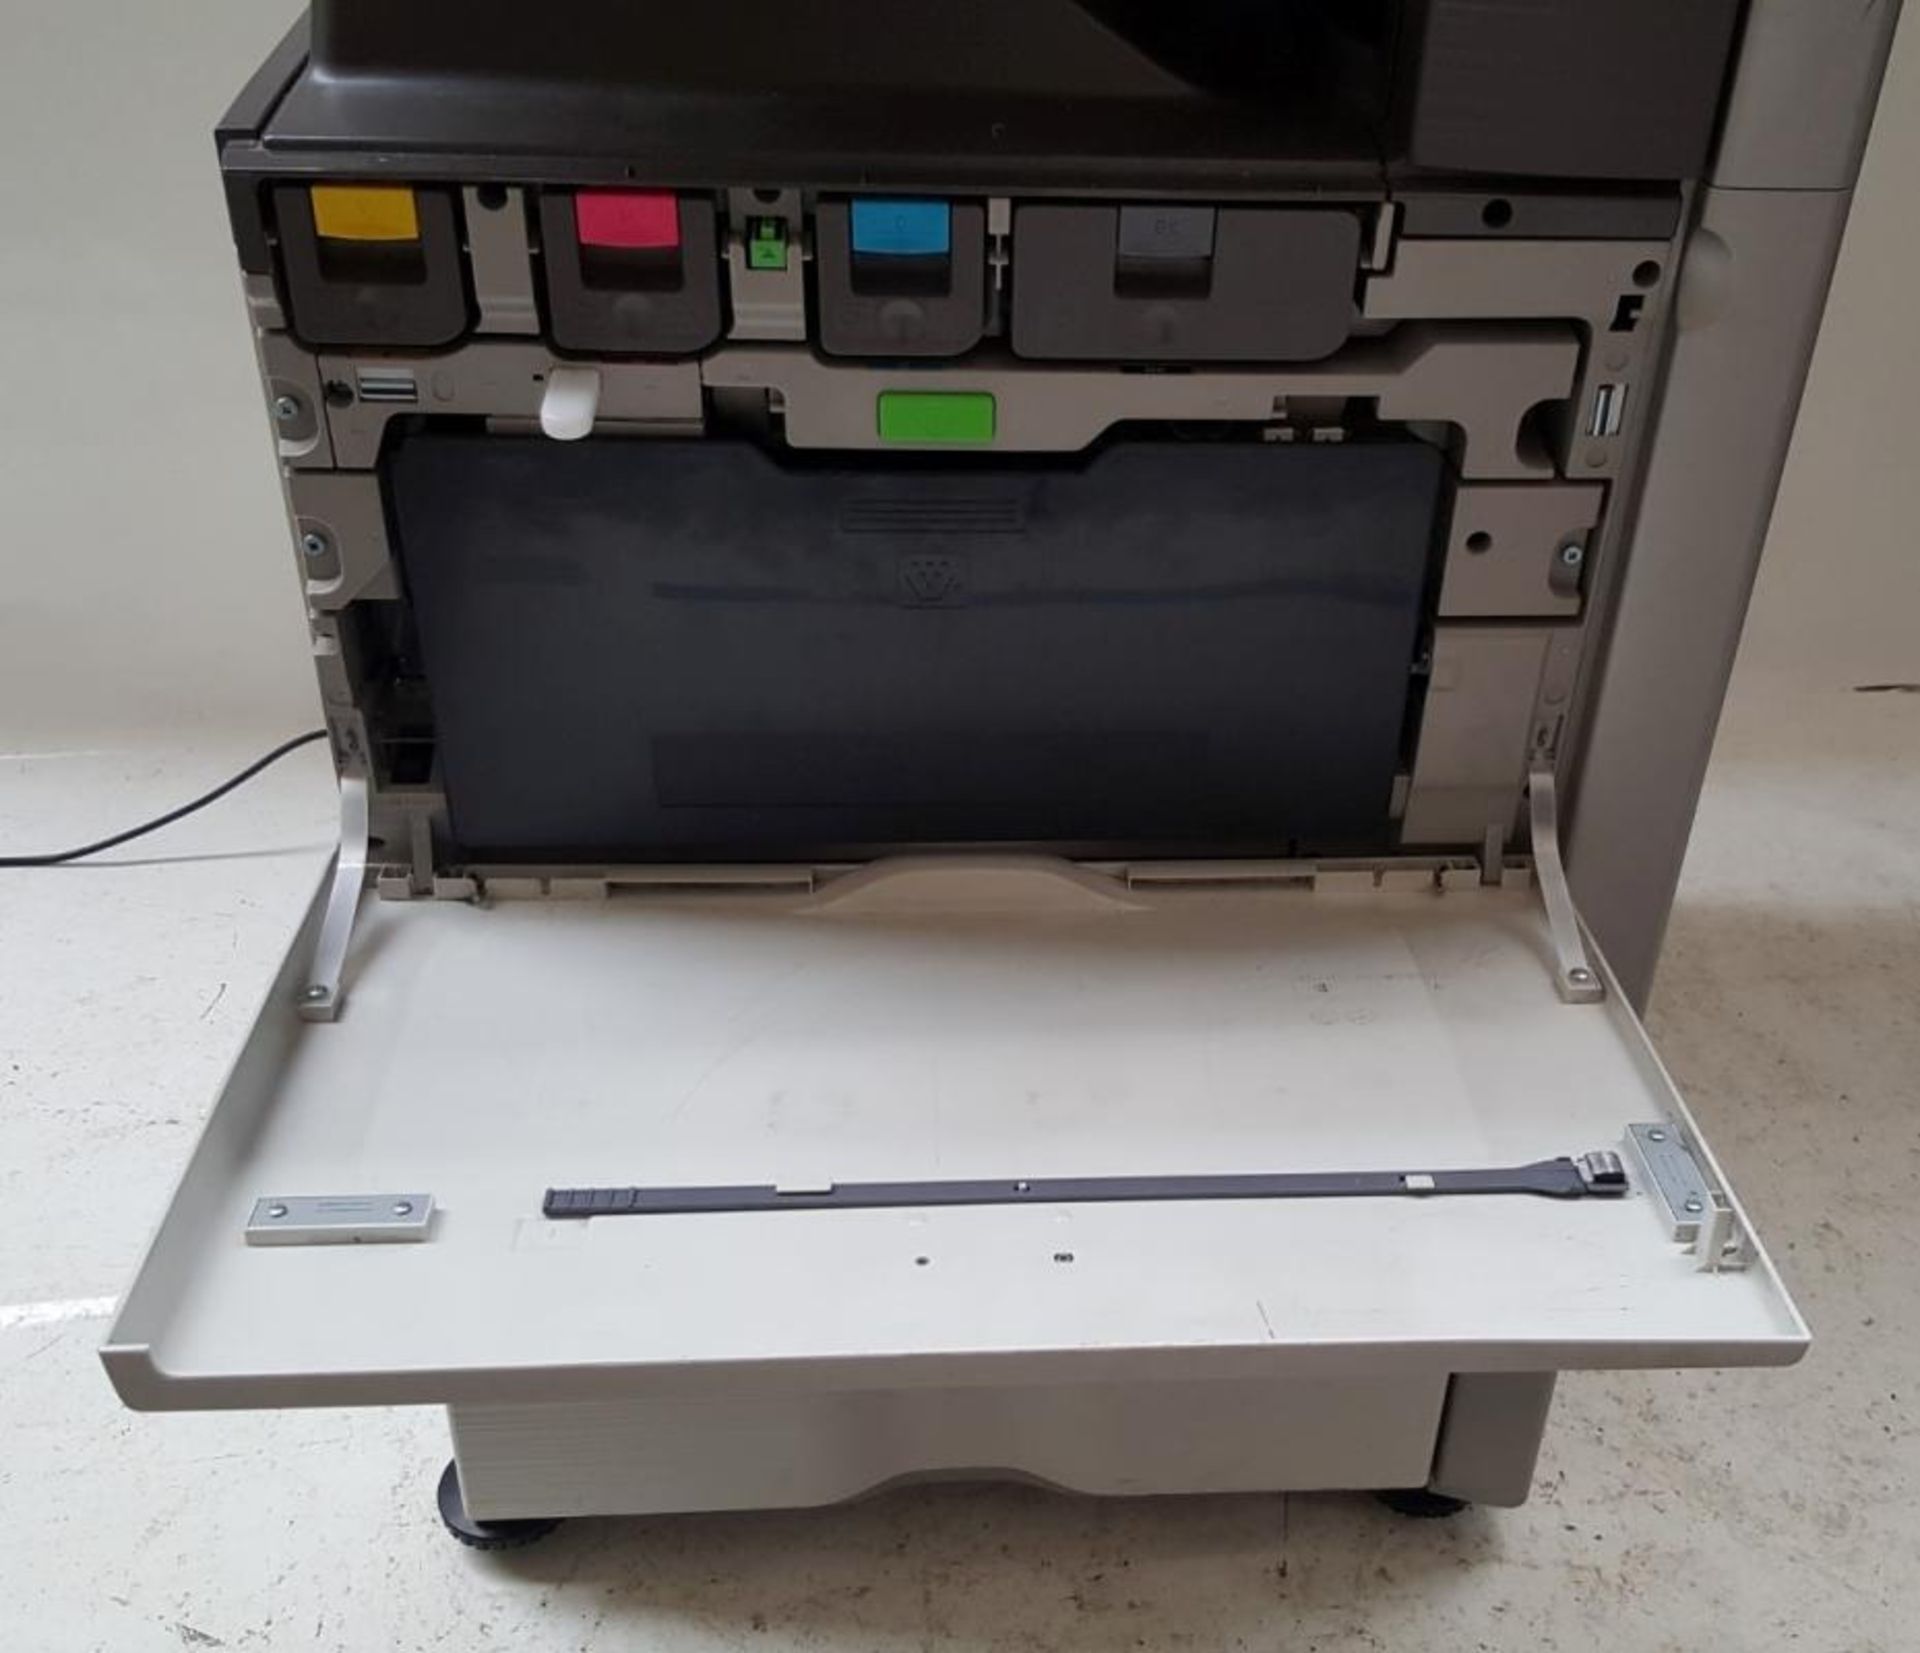 1 x Sharp MX-4112N Laser Office Printer Multifunction Device Copier Scanner (Has Come Out Of A Wor - Image 3 of 7